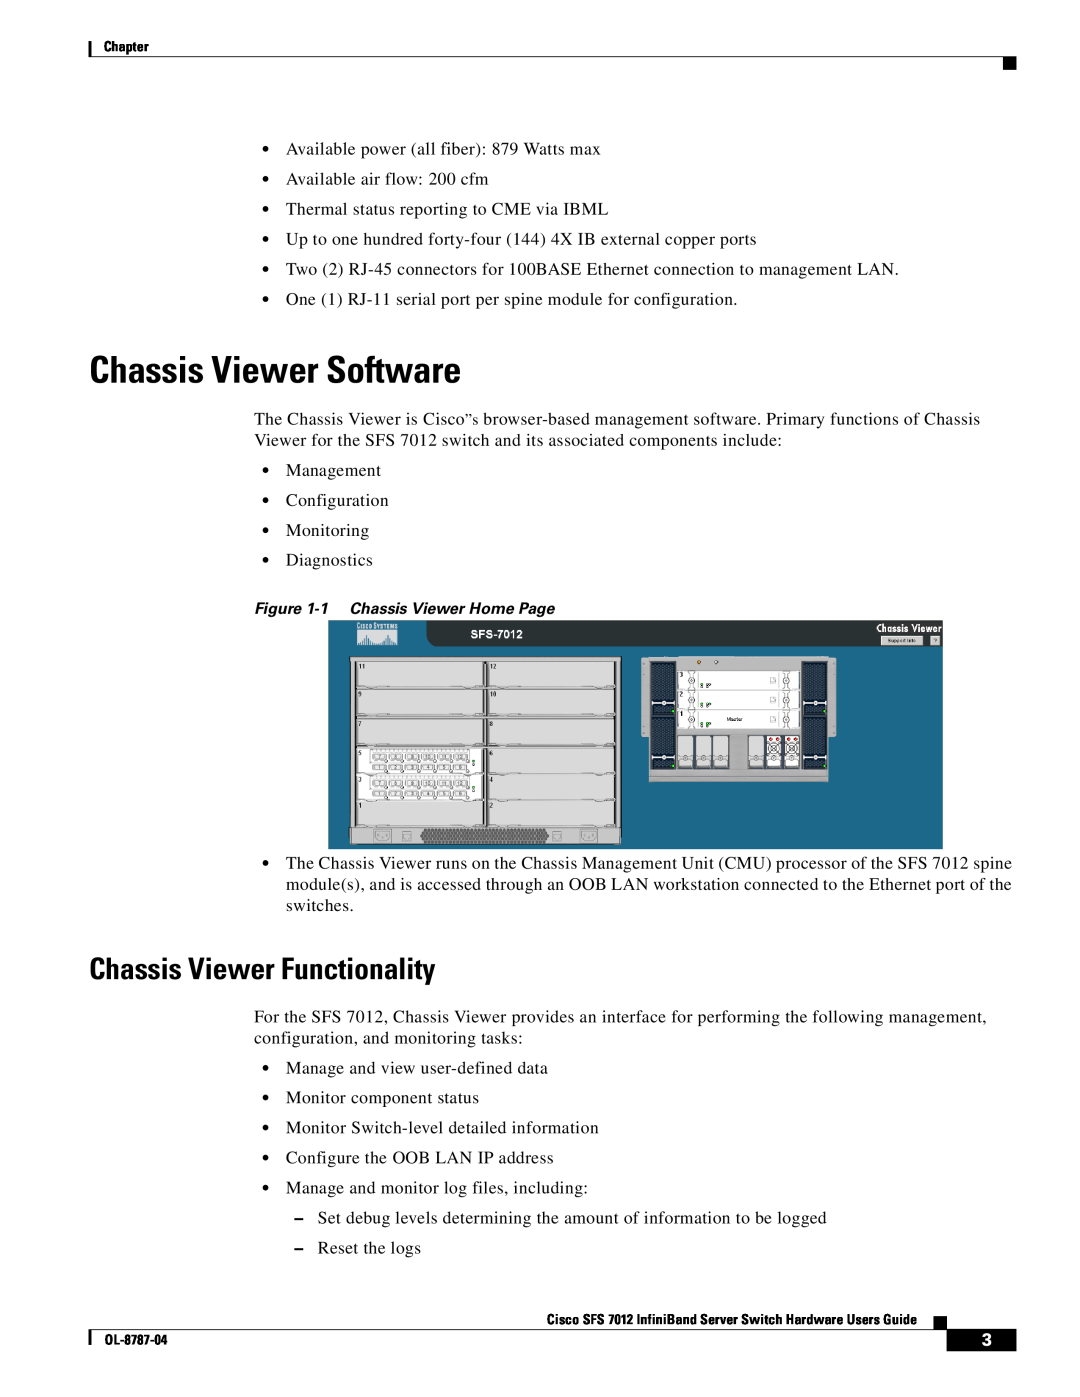 Cisco Systems SFS 7012 manual Chassis Viewer Software, Chassis Viewer Functionality 